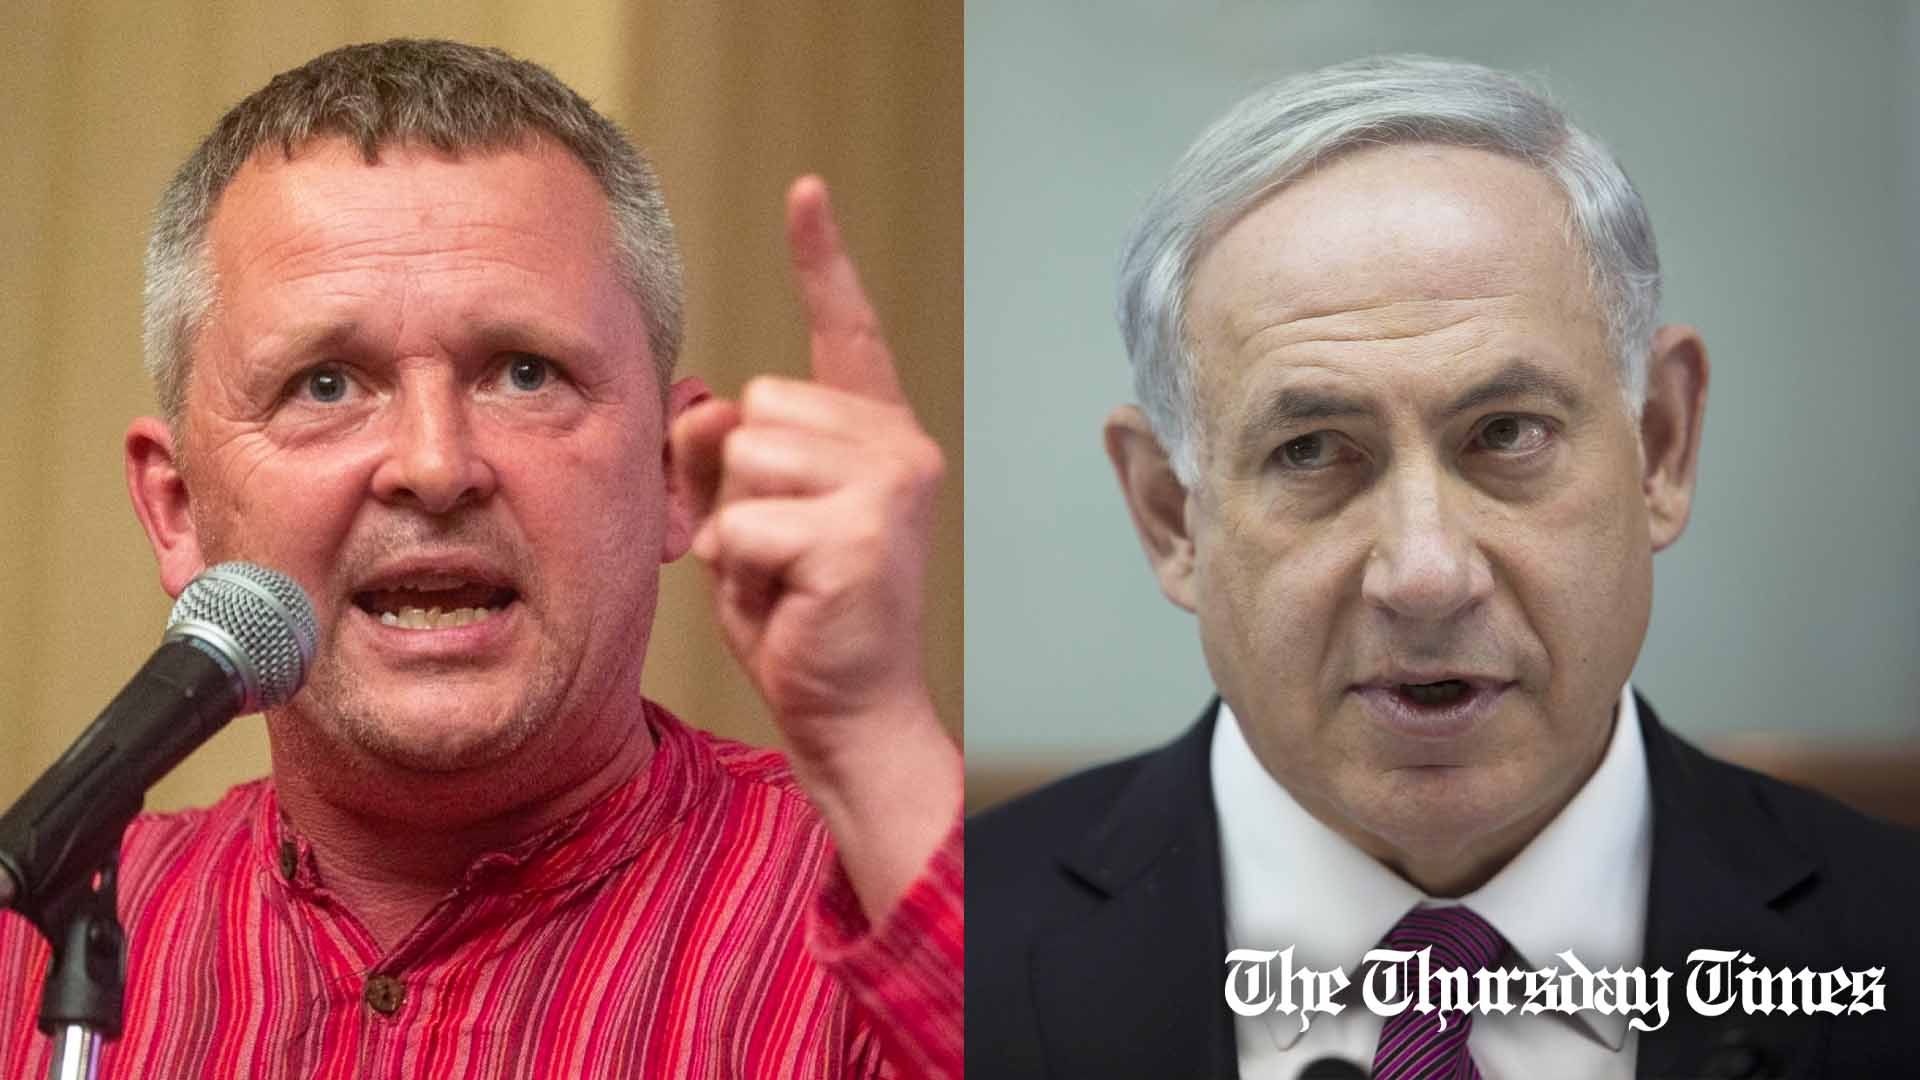 A combined file photo is shown of Irish TD Richard Boyd Barrett (L) and Israeli prime minister Benjamin Netanyahu (R). — FILE/THE THURSDAY TIMES